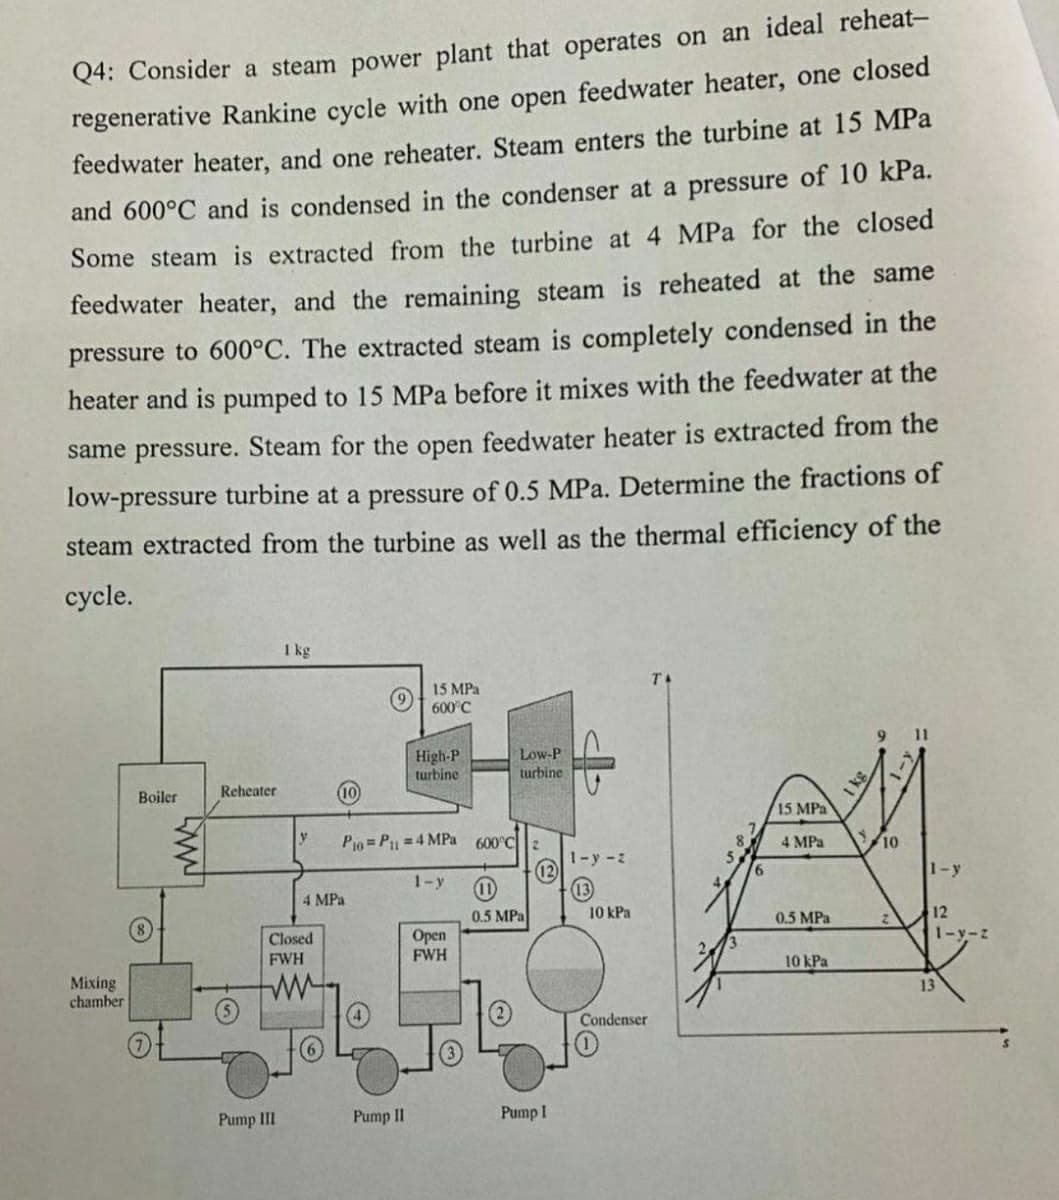 Q4: Consider a steam power plant that operates on an ideal reheat-
regenerative Rankine cycle with one open feedwater heater, one closed
feedwater heater, and one reheater. Steam enters the turbine at 15 MPa
the condenser at a pressure of 10 kPa.
and 600°C and is condensed
Some steam is extracted from the turbine at 4 MPa for the closed
feedwater heater, and the remaining steam is reheated at the same
pressure to 600°C. The extracted steam is completely condensed in the
heater and is pumped to 15 MPa before it mixes with the feedwater at the
same pressure. Steam for the open feedwater heater is extracted from the
low-pressure turbine at a pressure of 0.5 MPa. Determine the fractions of
steam extracted from the turbine as well as the thermal efficiency of the
сycle.
I kg
TA
15 MPa
600°C
11
High-P
turbine
Low-P
turbine
Boiler
Reheater
10
15 MPa
Po= P =4 MPa 600°C2
4 MPa
10
1-y -z
12
1-y
6.
1-y
4 MPa
0.5 MPa
10 kPa
0.5 MPa
12
2.
Open
FWH
Closed
1-y-z
FWH
10 kPa
Mixing
chamber
13
Condenser
Pump III
Pump II
Pump I
